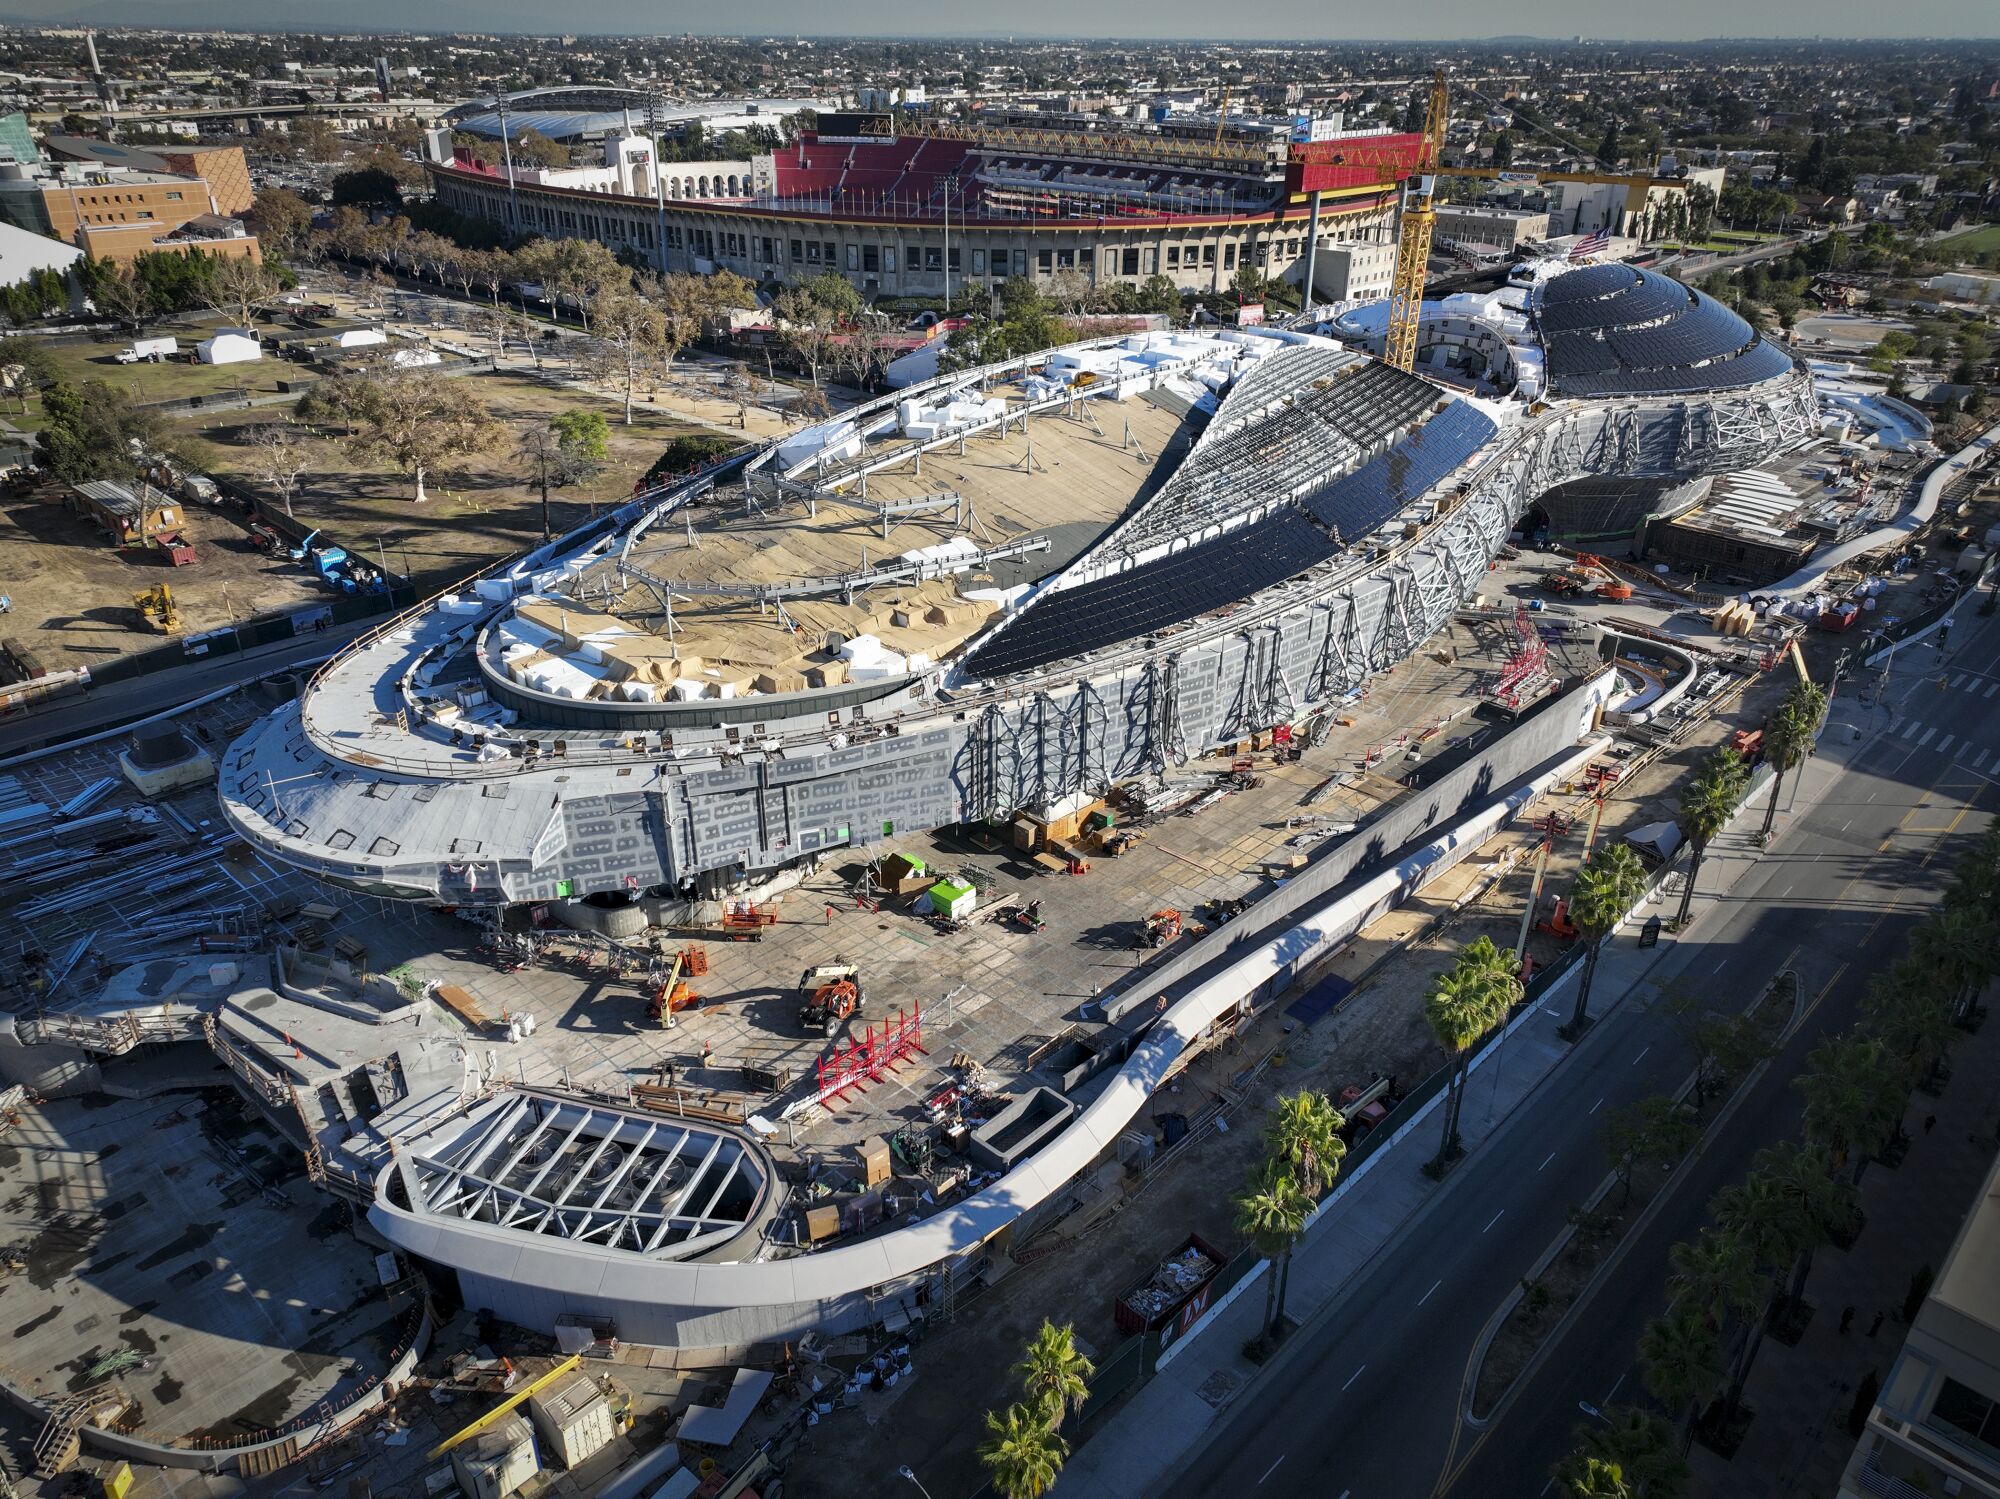 The L.A. Coliseum stands behind the Lucas Museum of Narrative Art under construction in Exposition Park.